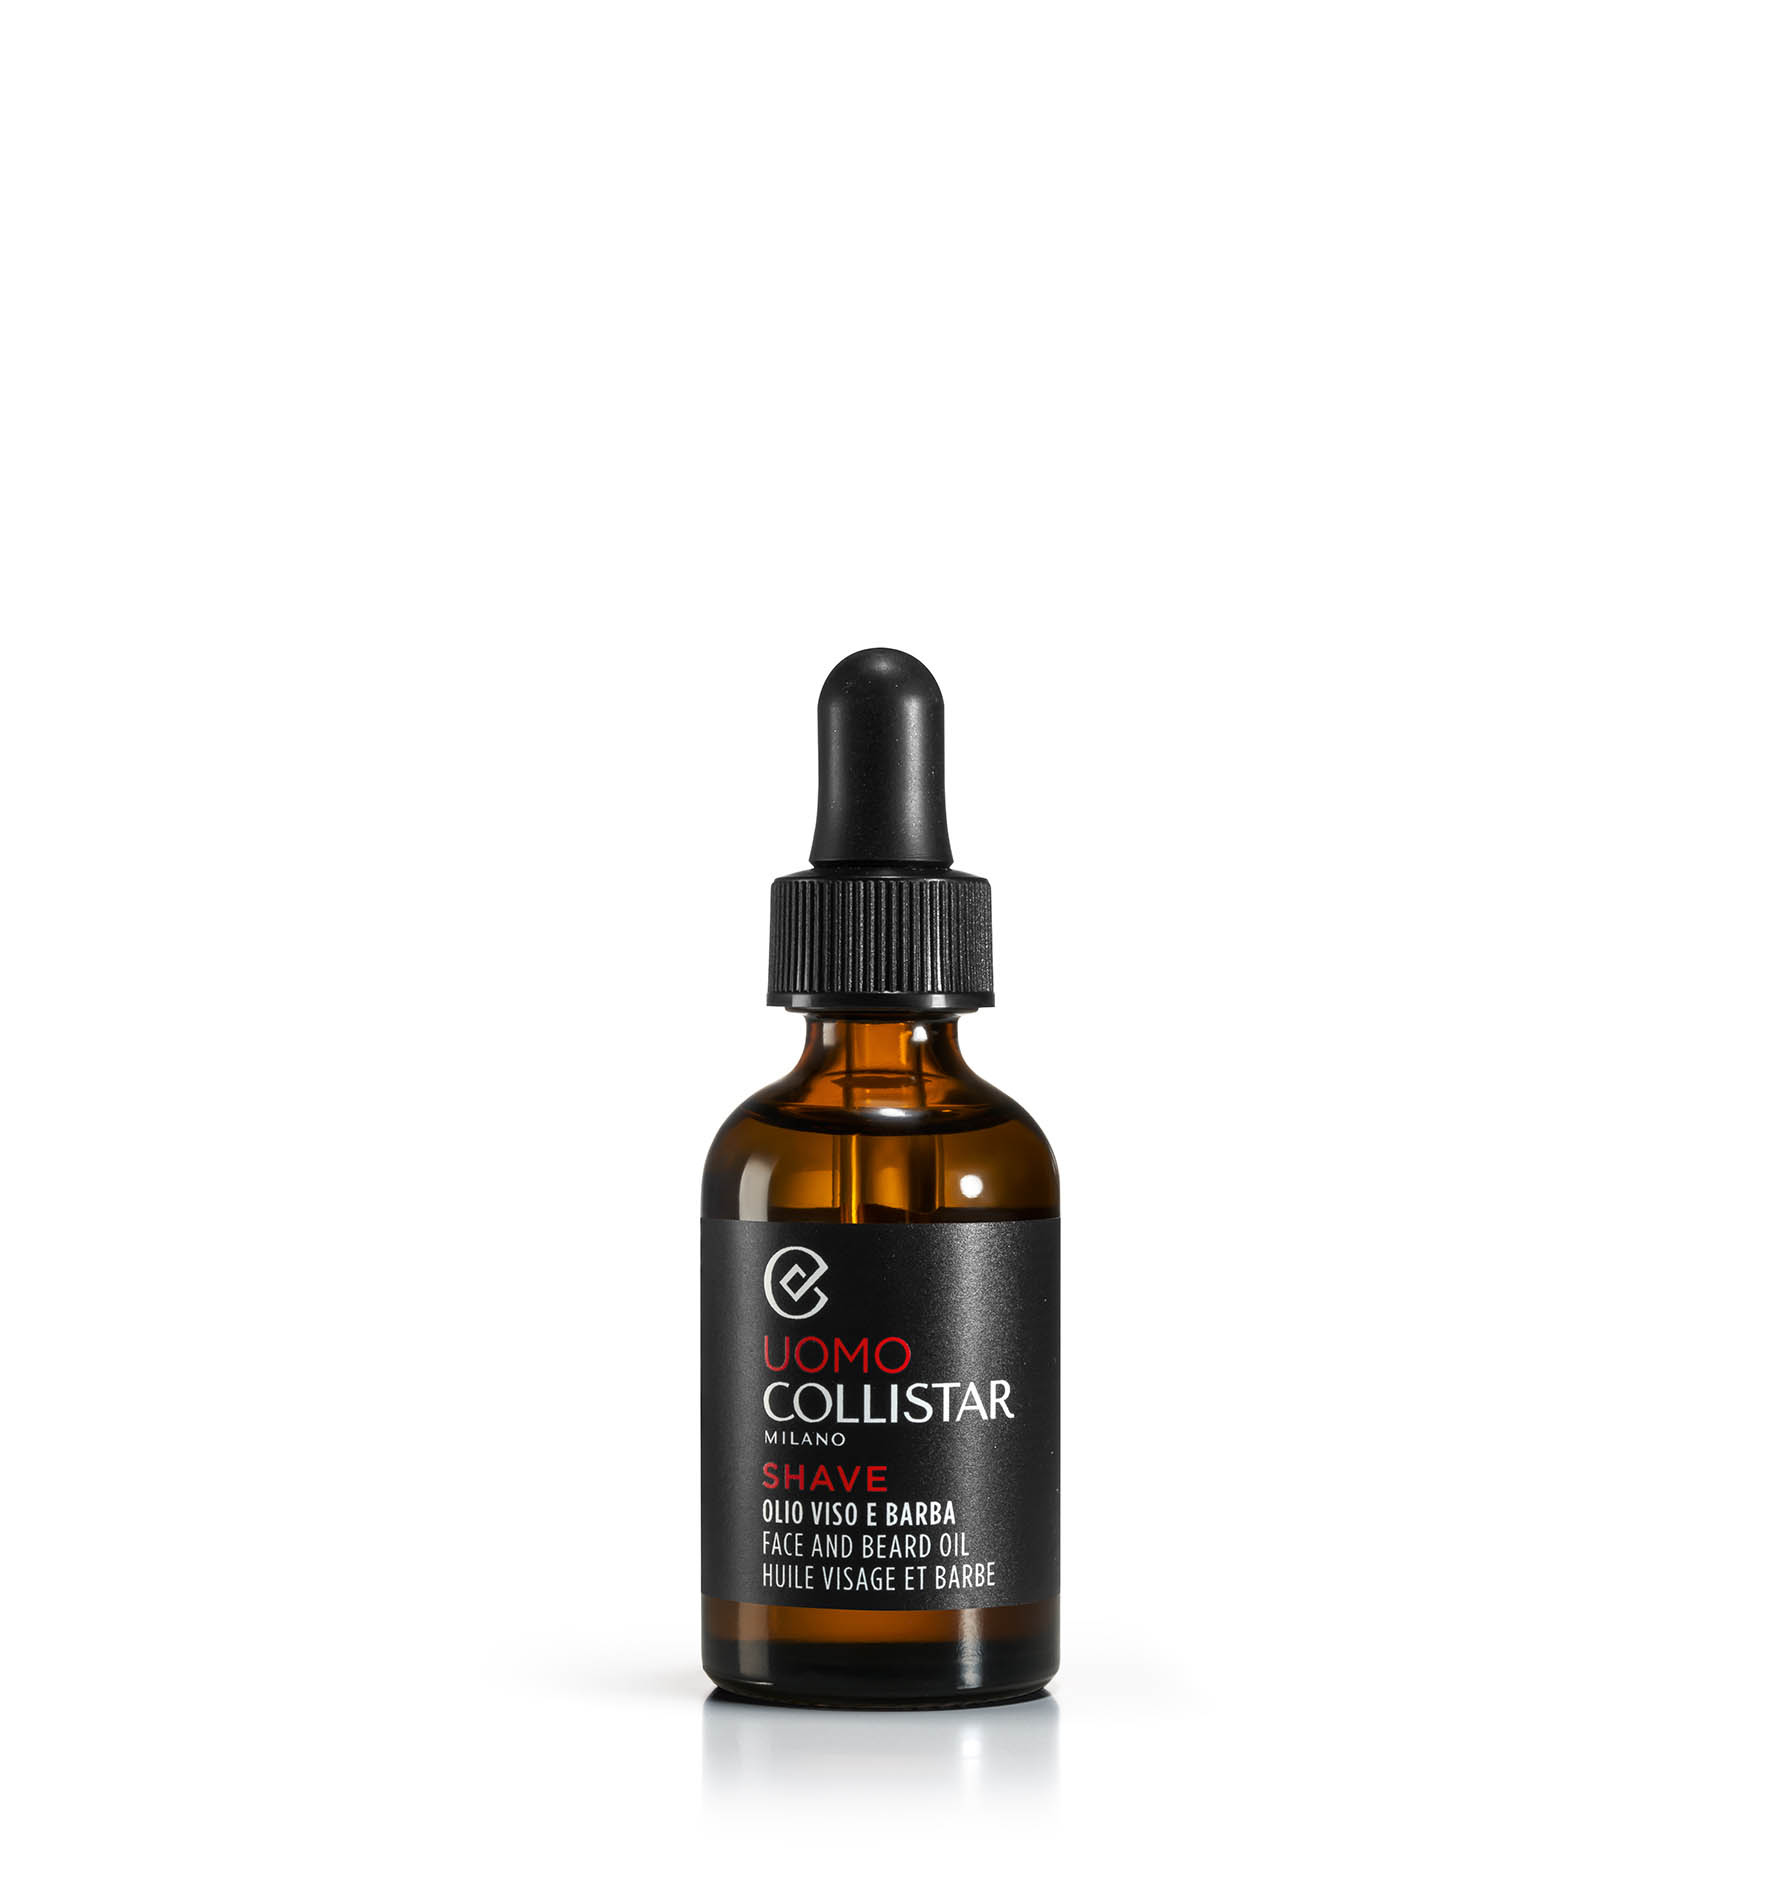 FACE AND BEARD OIL - Hydration | Collistar - Shop Online Ufficiale